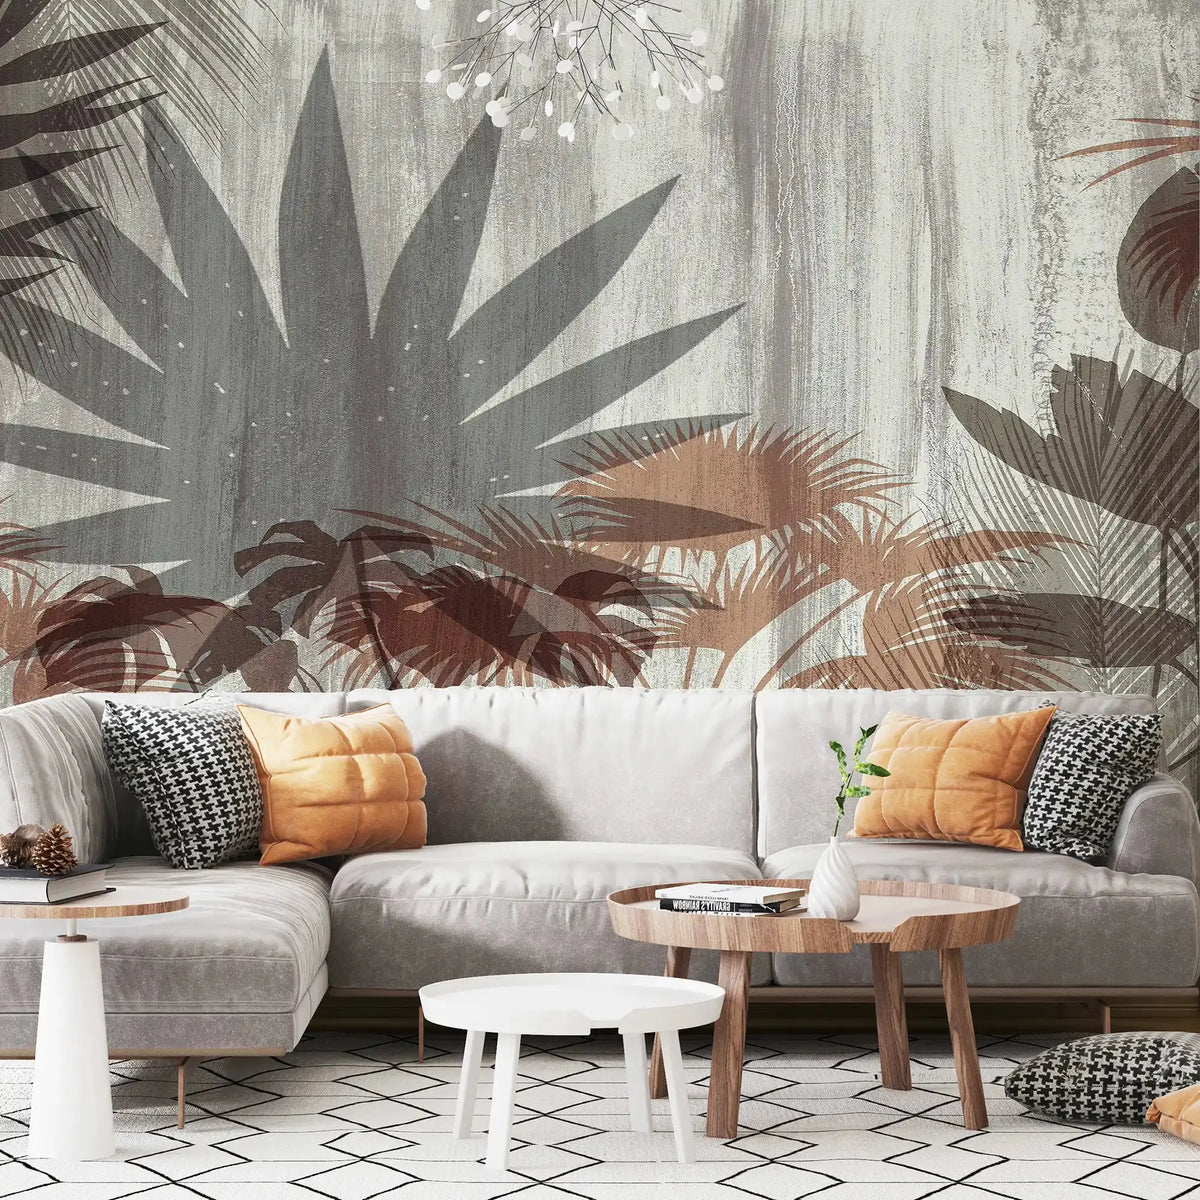 3077-C / Botanical Wall Mural: Peel and Stick Wallpaper with Wild Floral and Plant Motif - Artevella